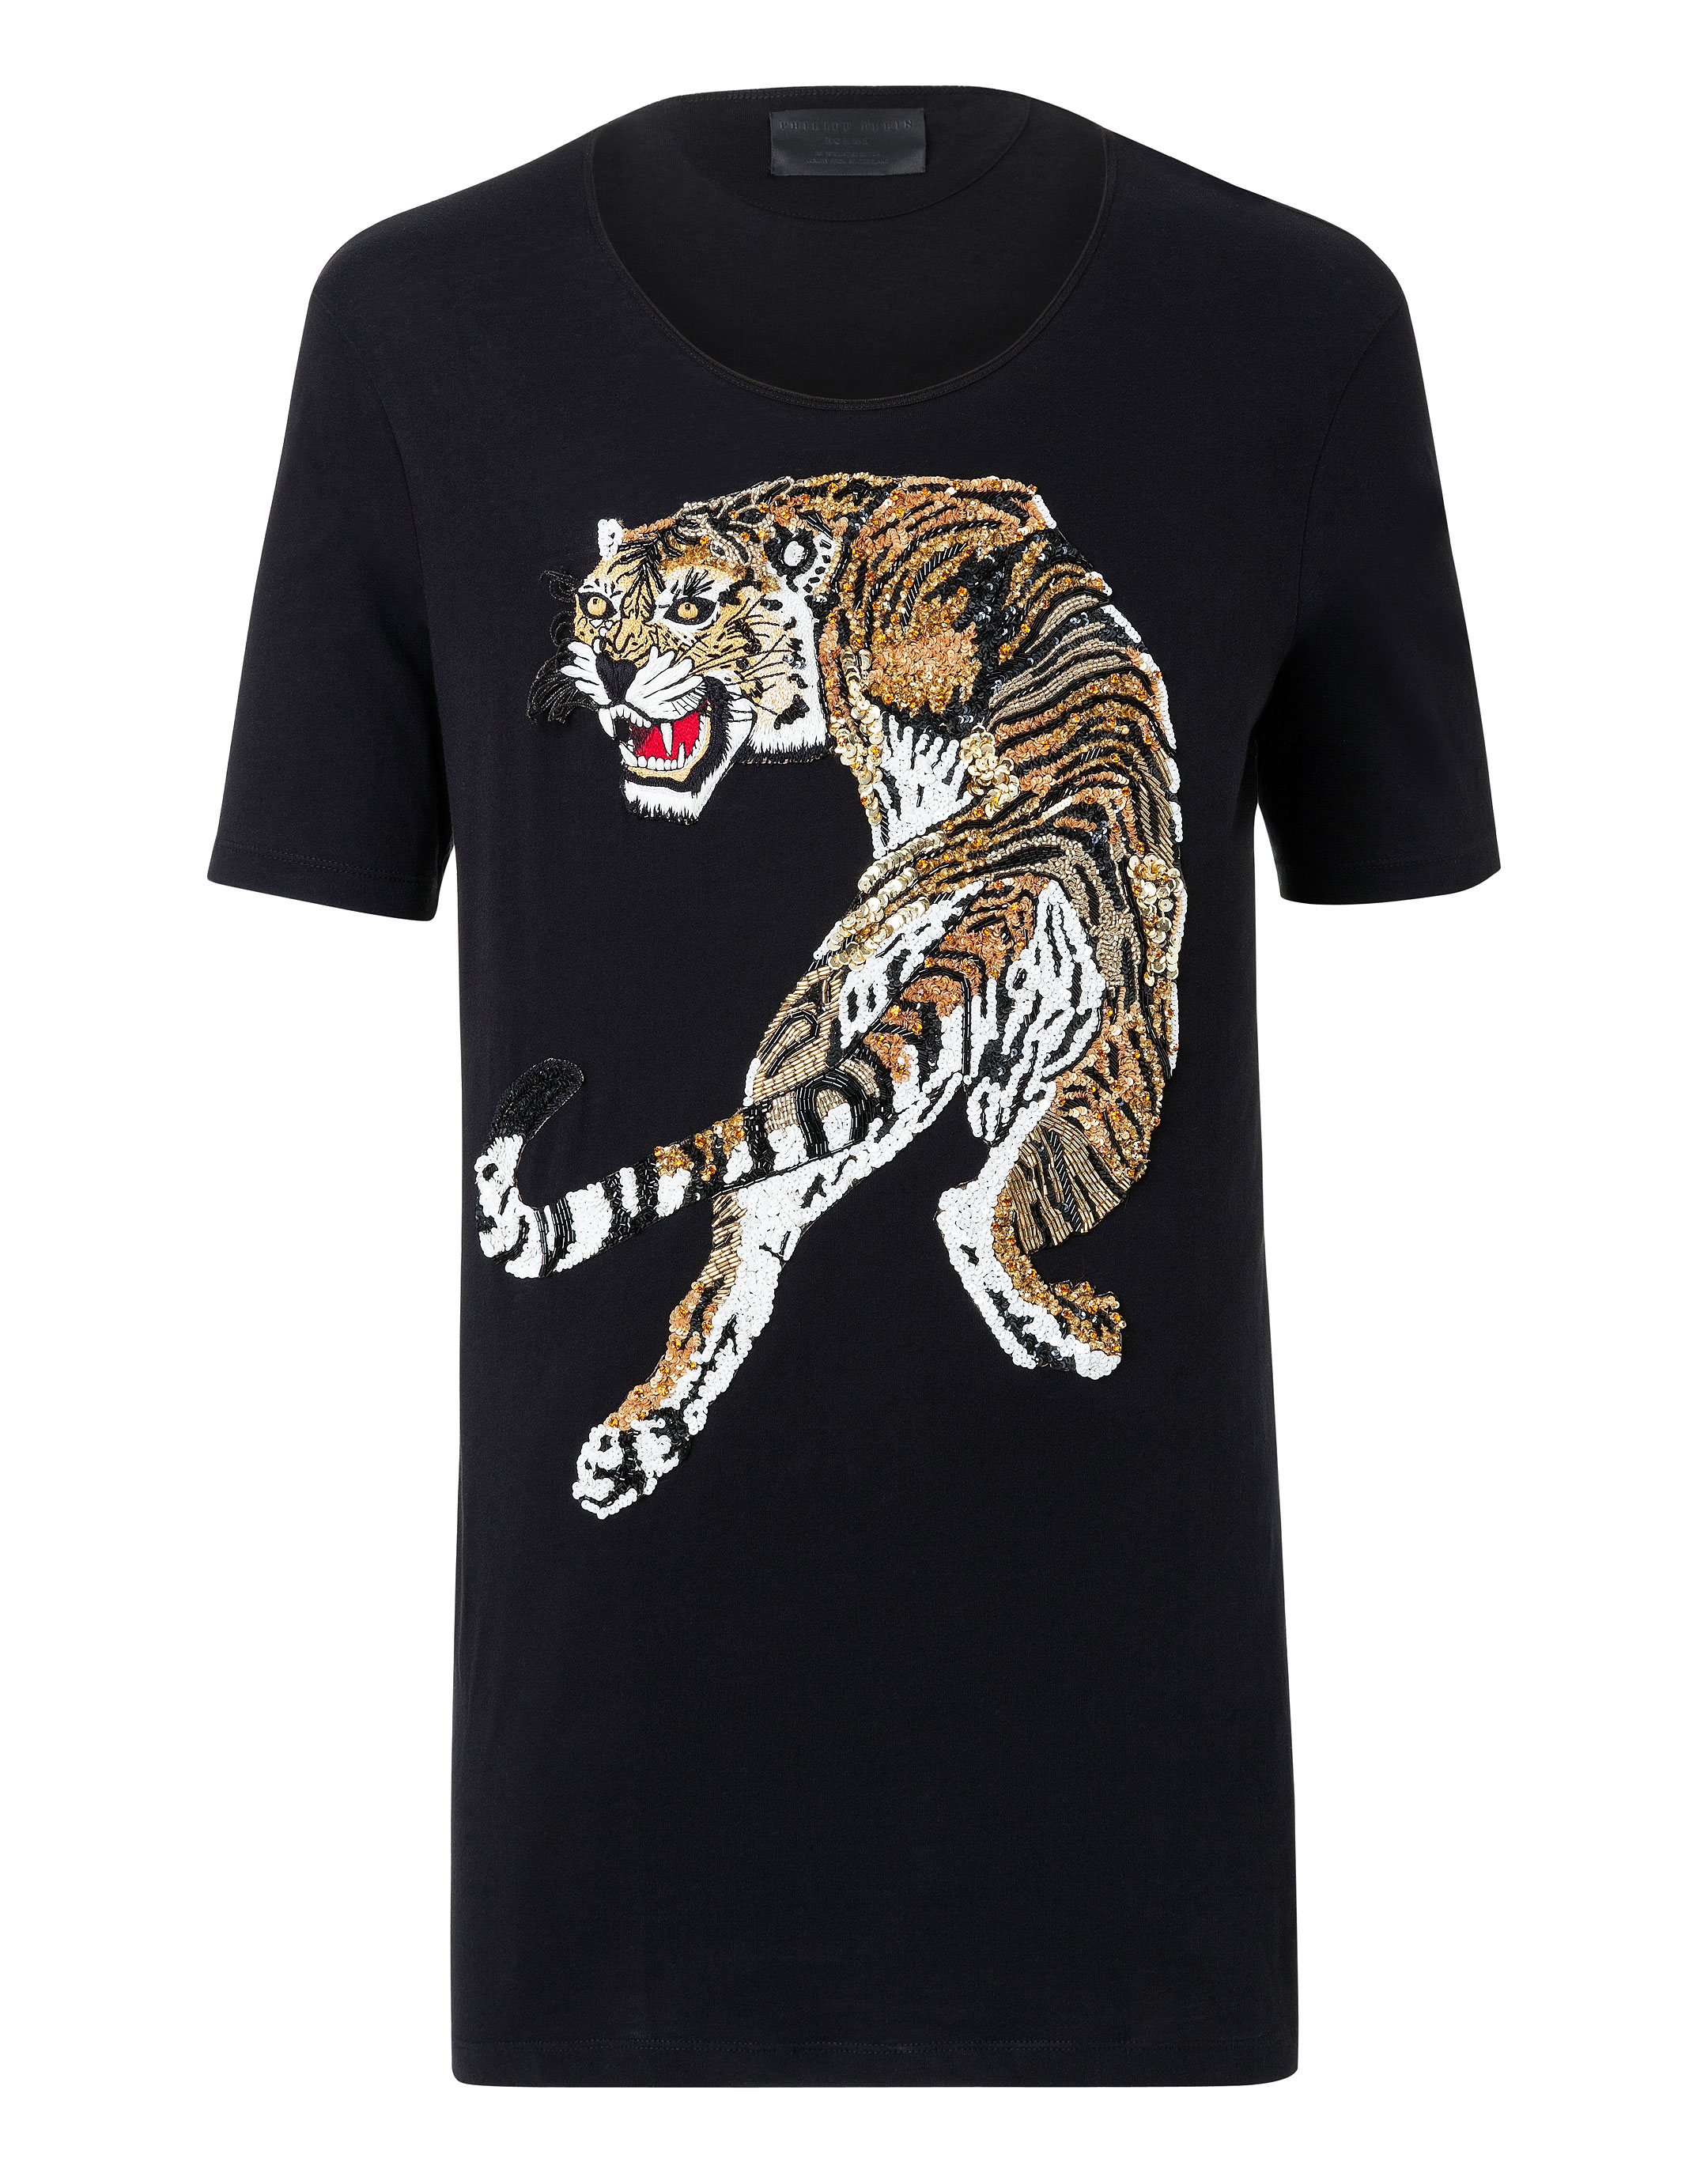 shirt with tiger